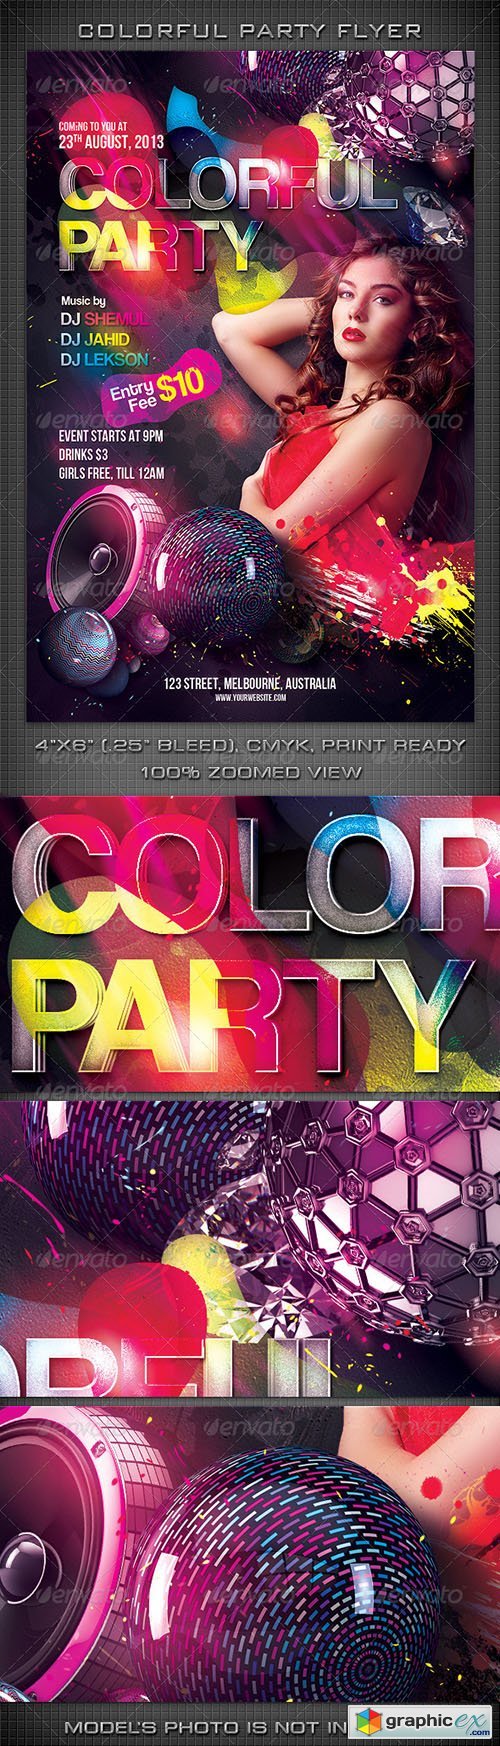 Colorful Party Flyer